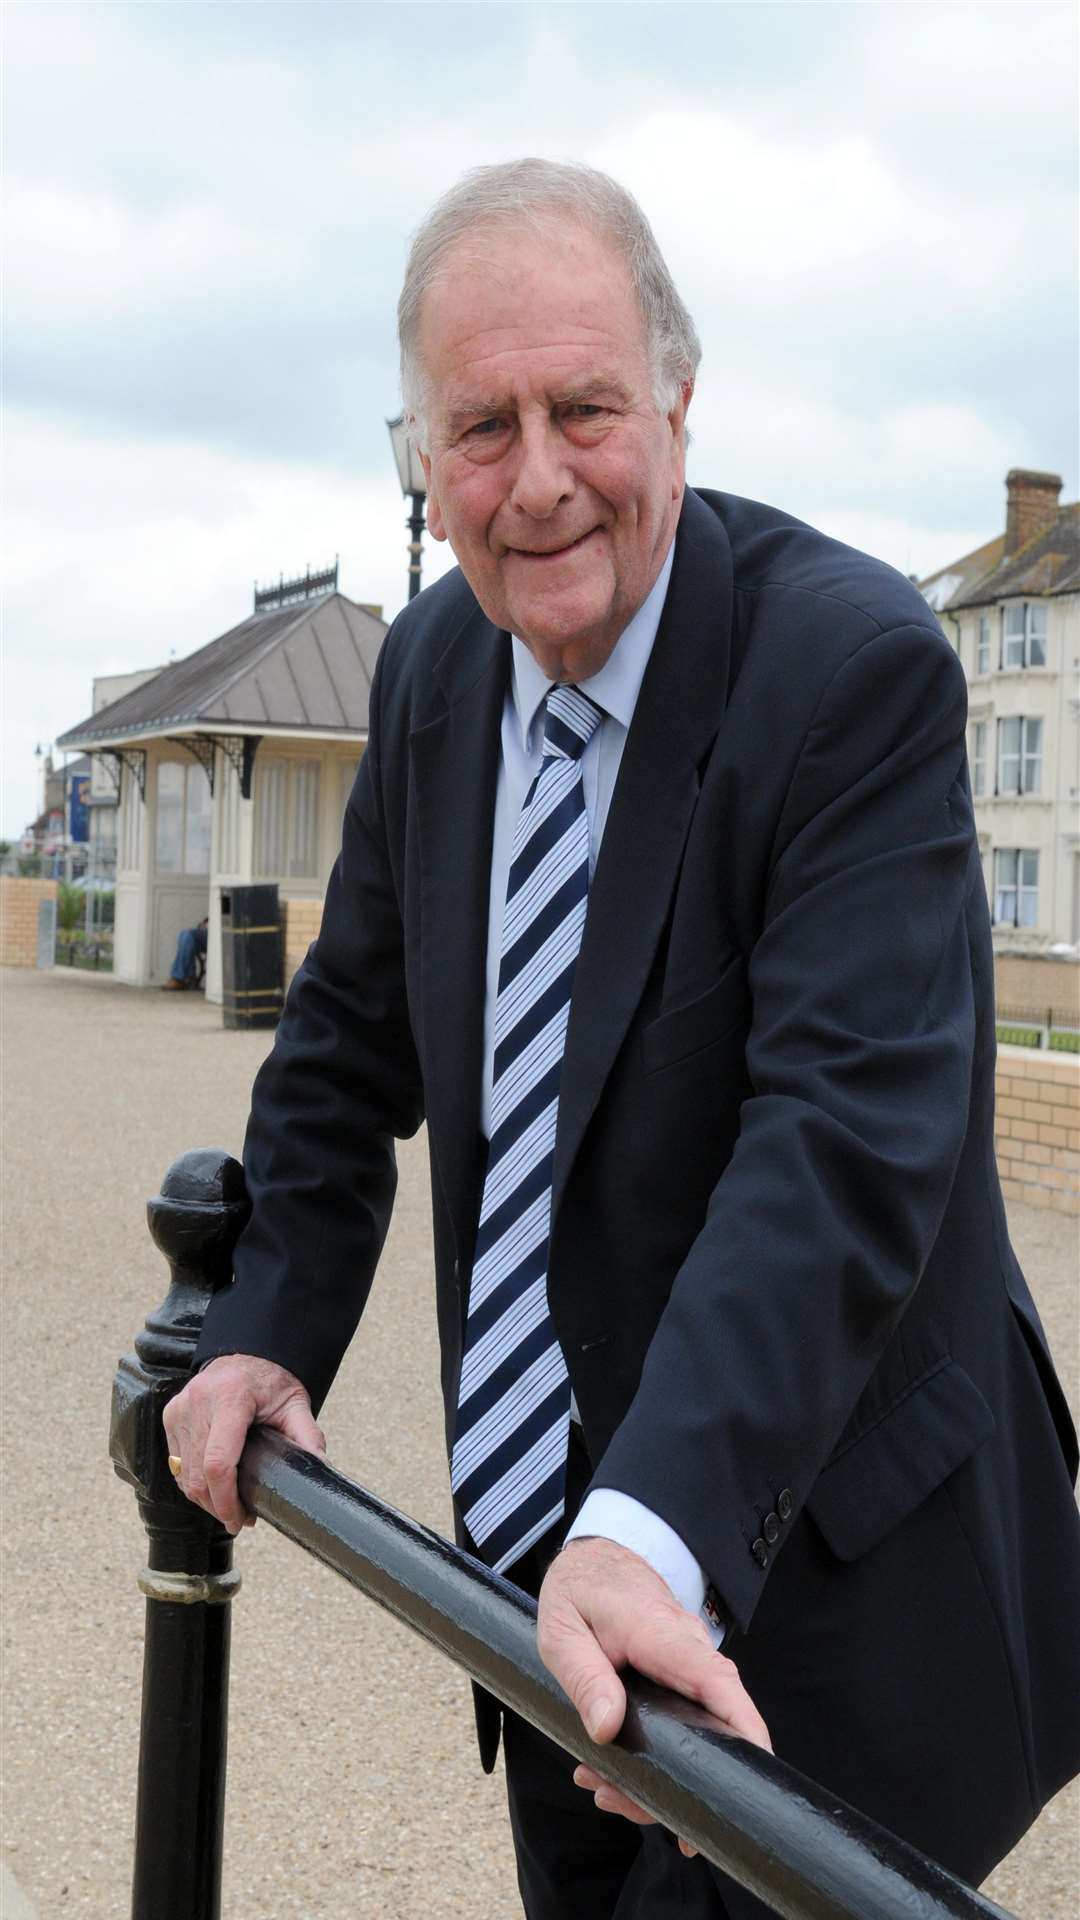 Thanet North MP Sir Roger Gale